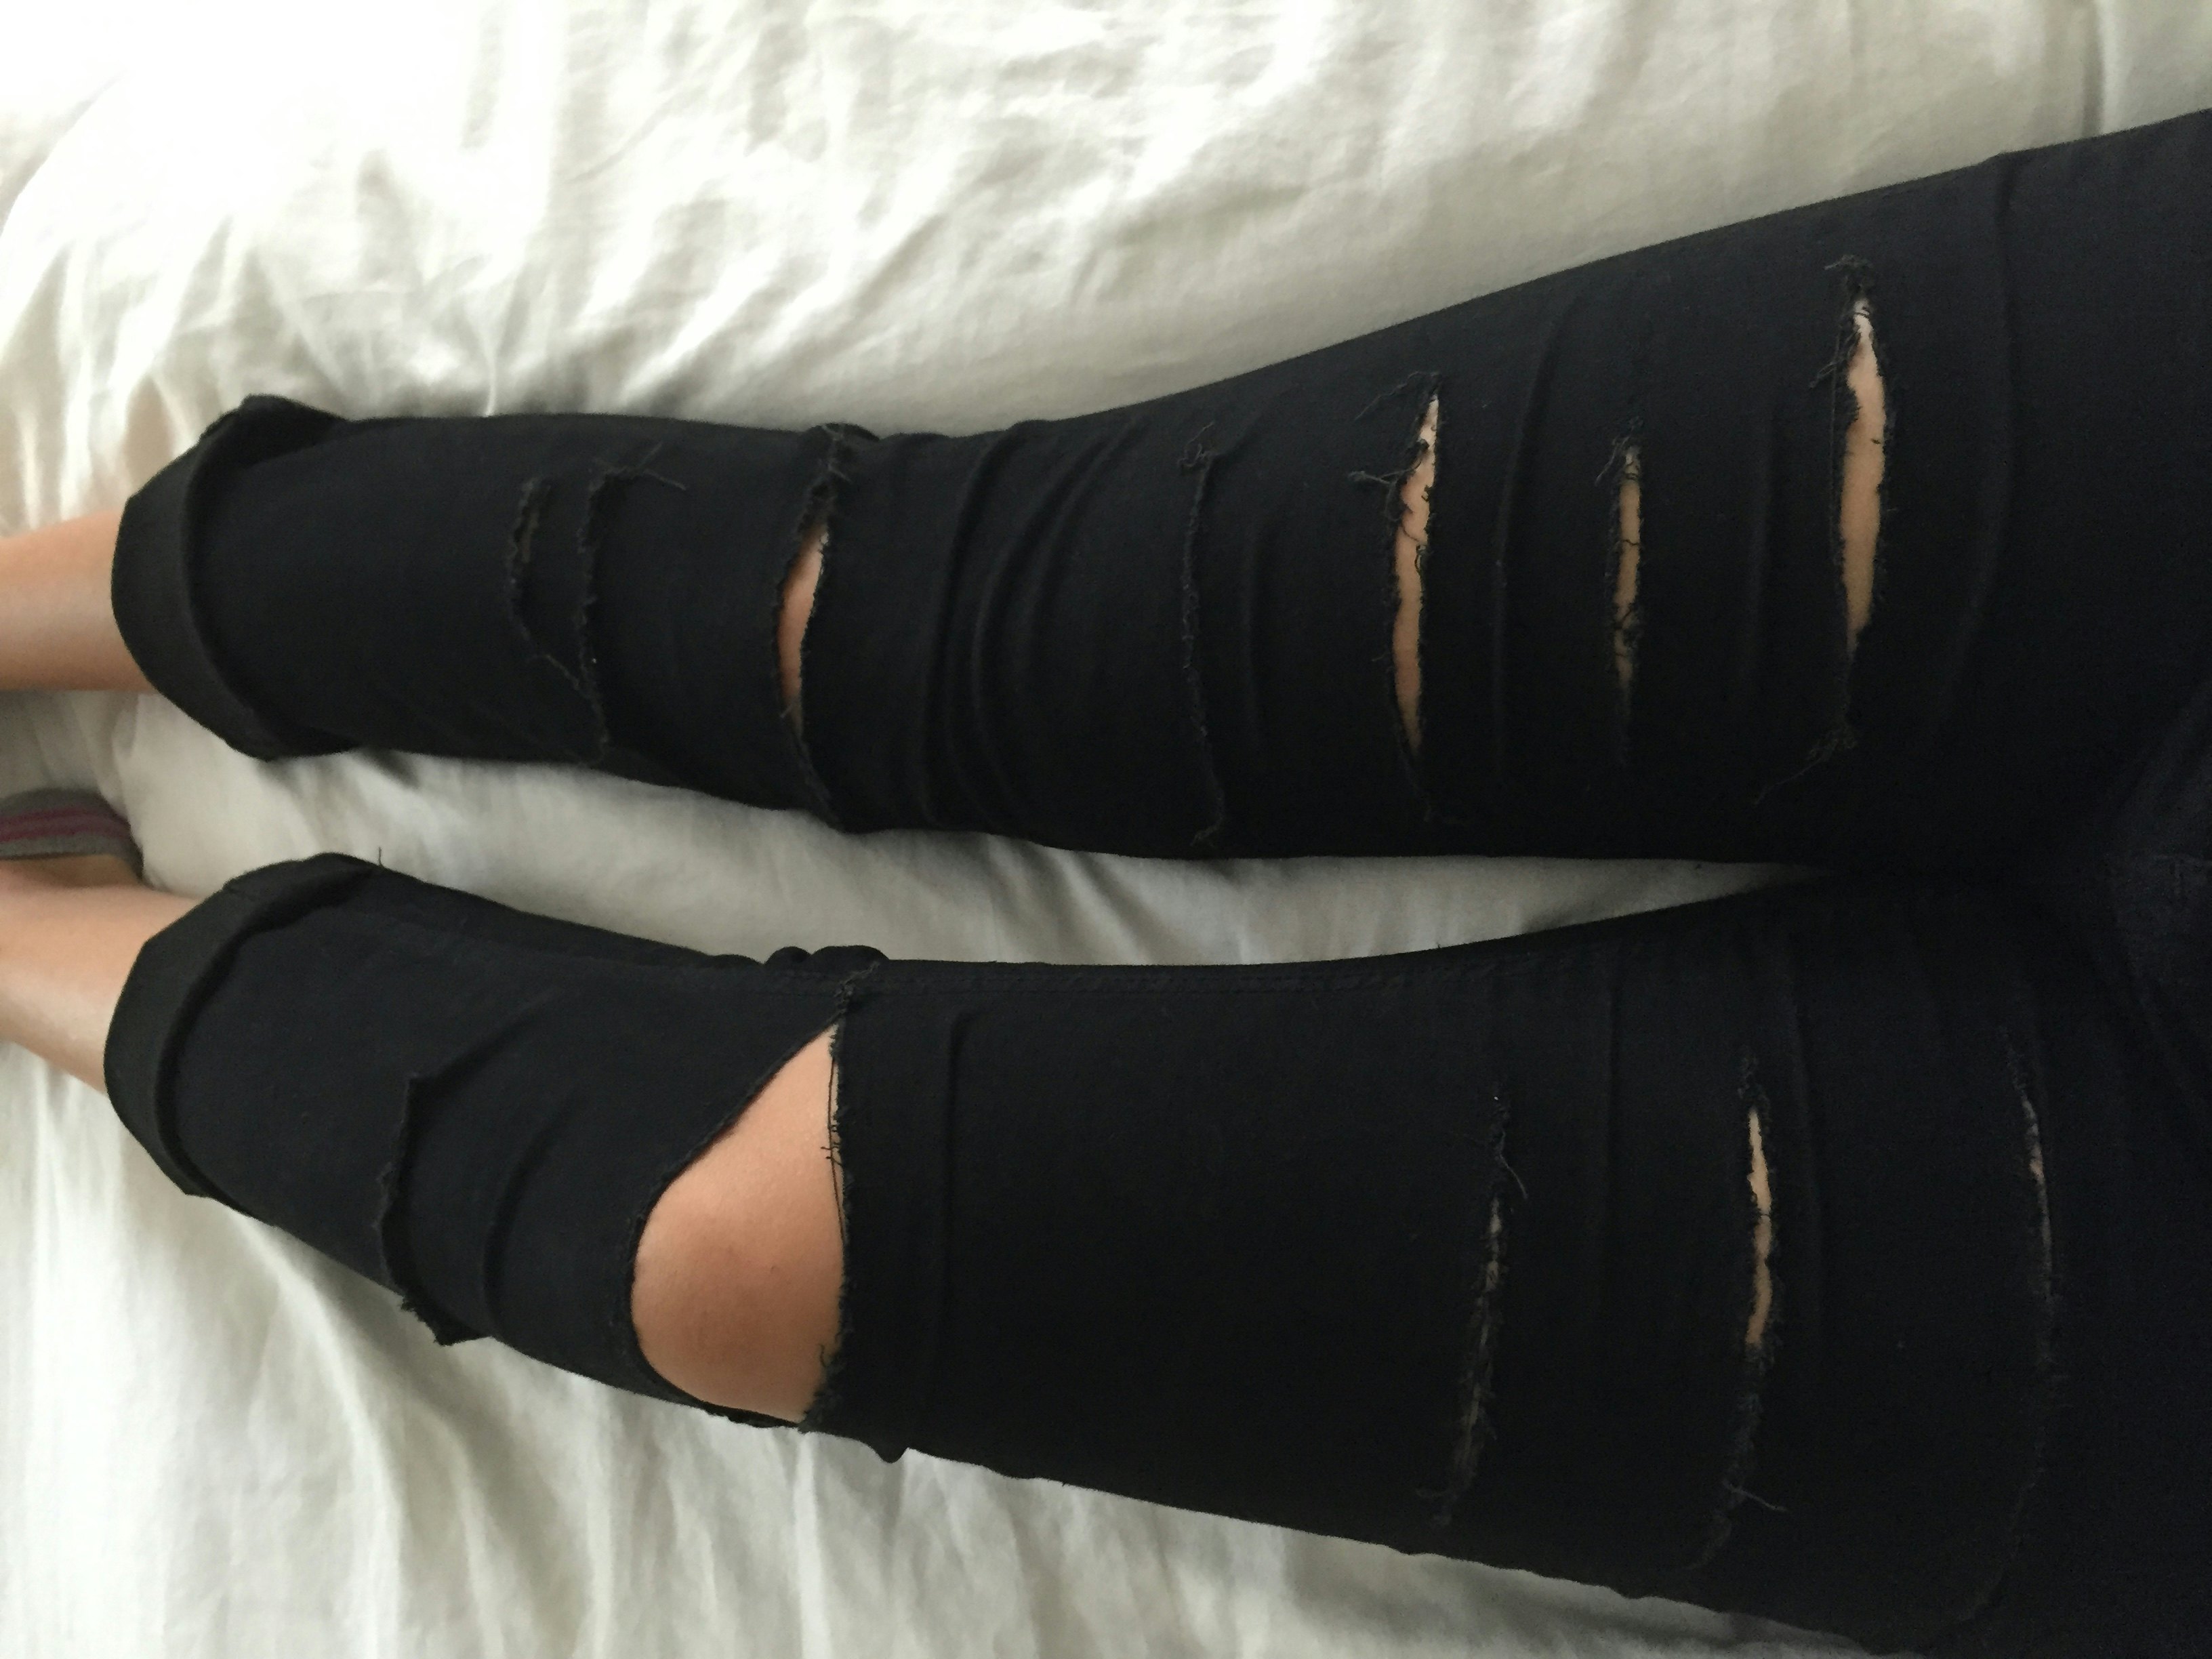 black jeans with holes in them